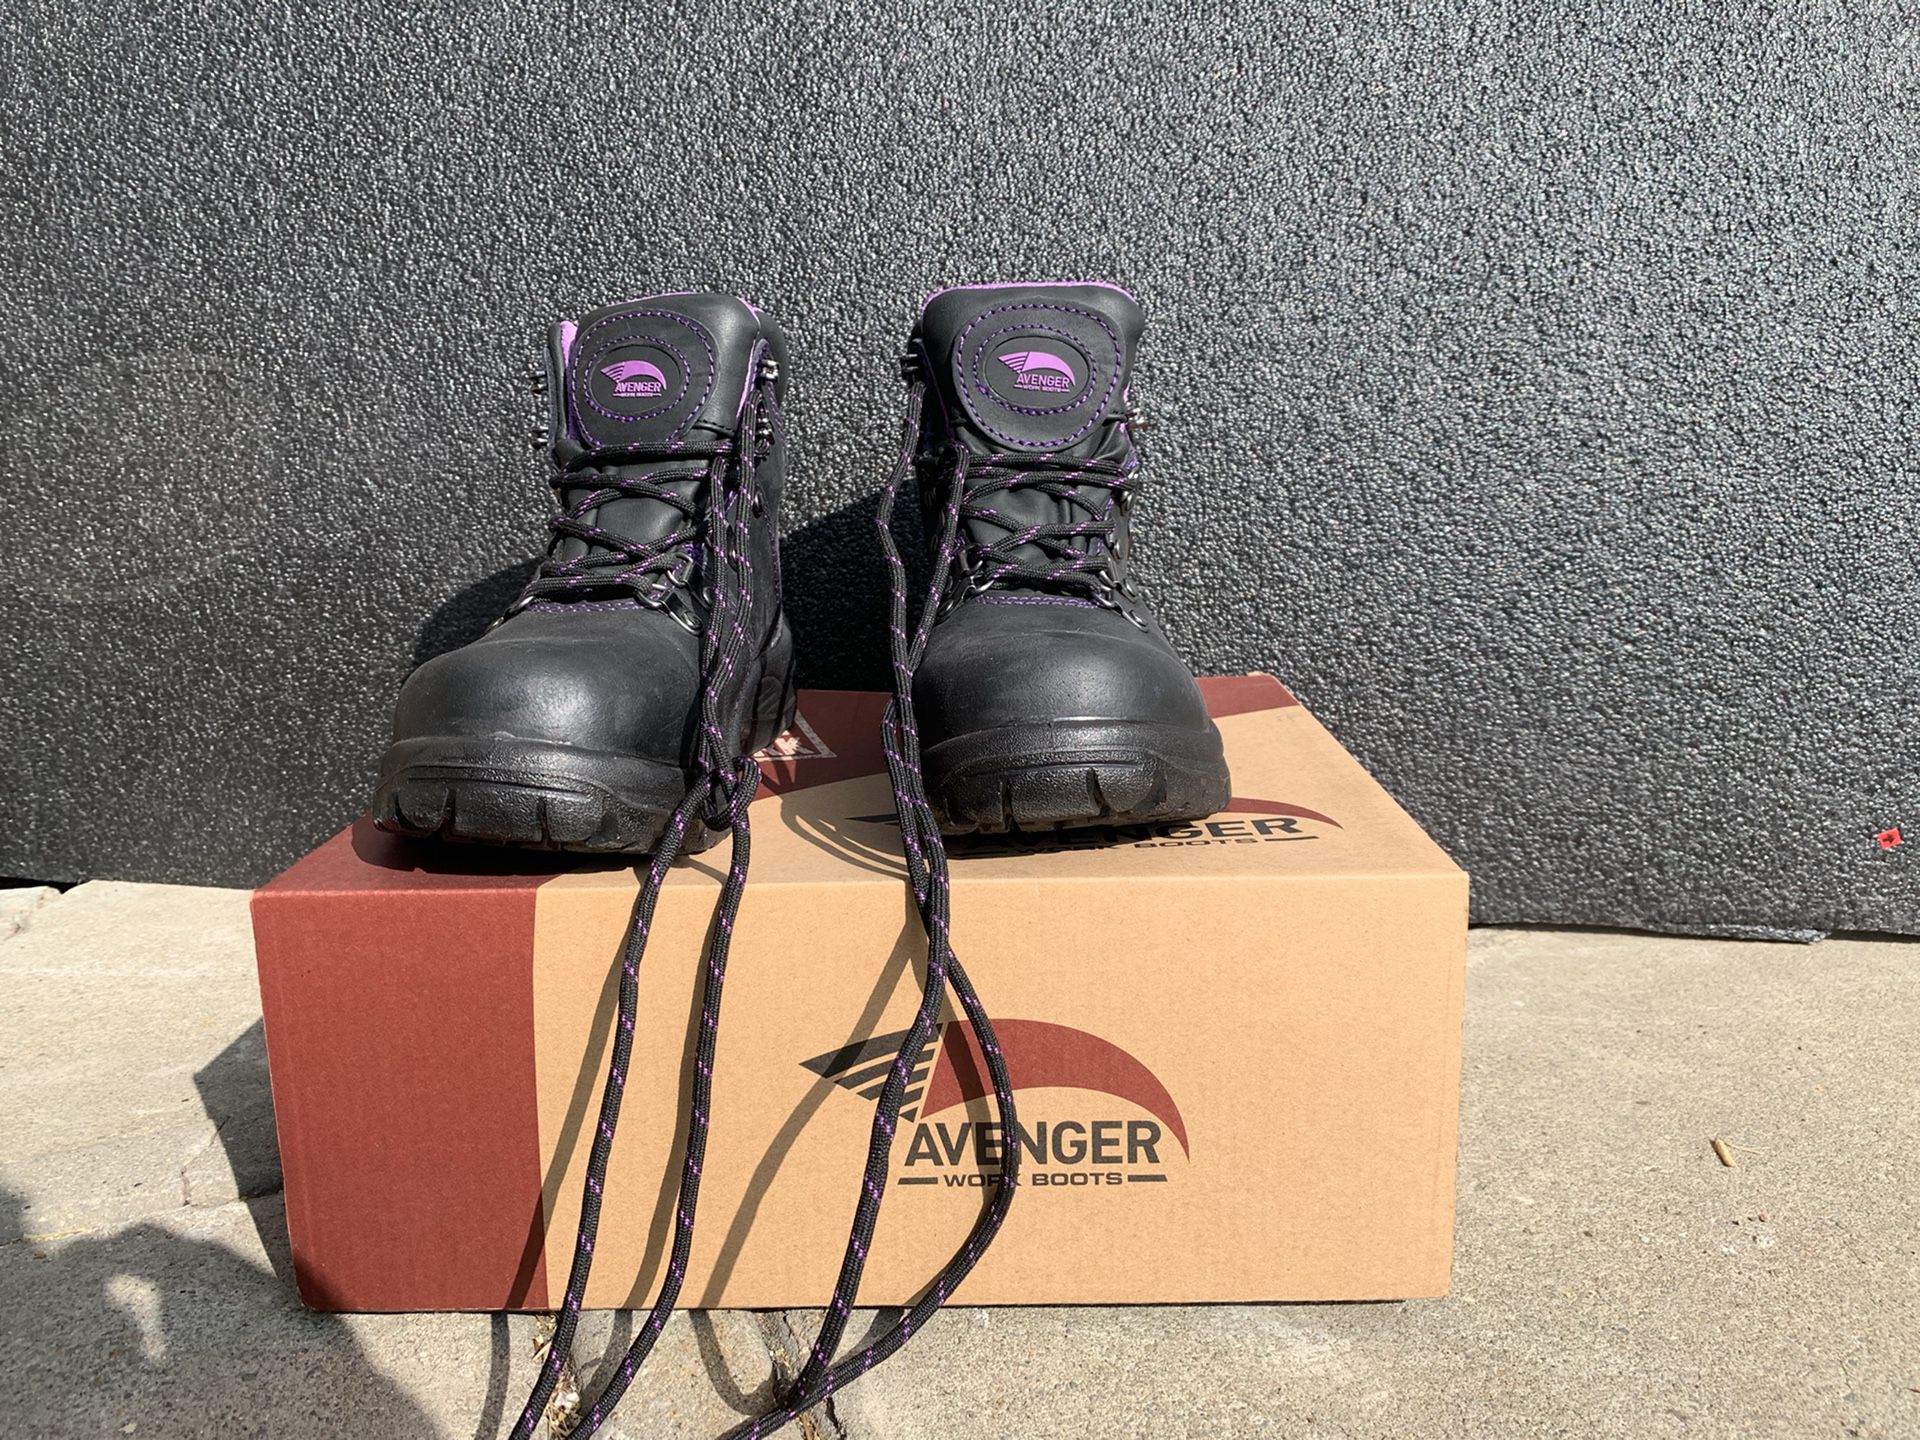 Woman Avenger work safety boots 6 1/2